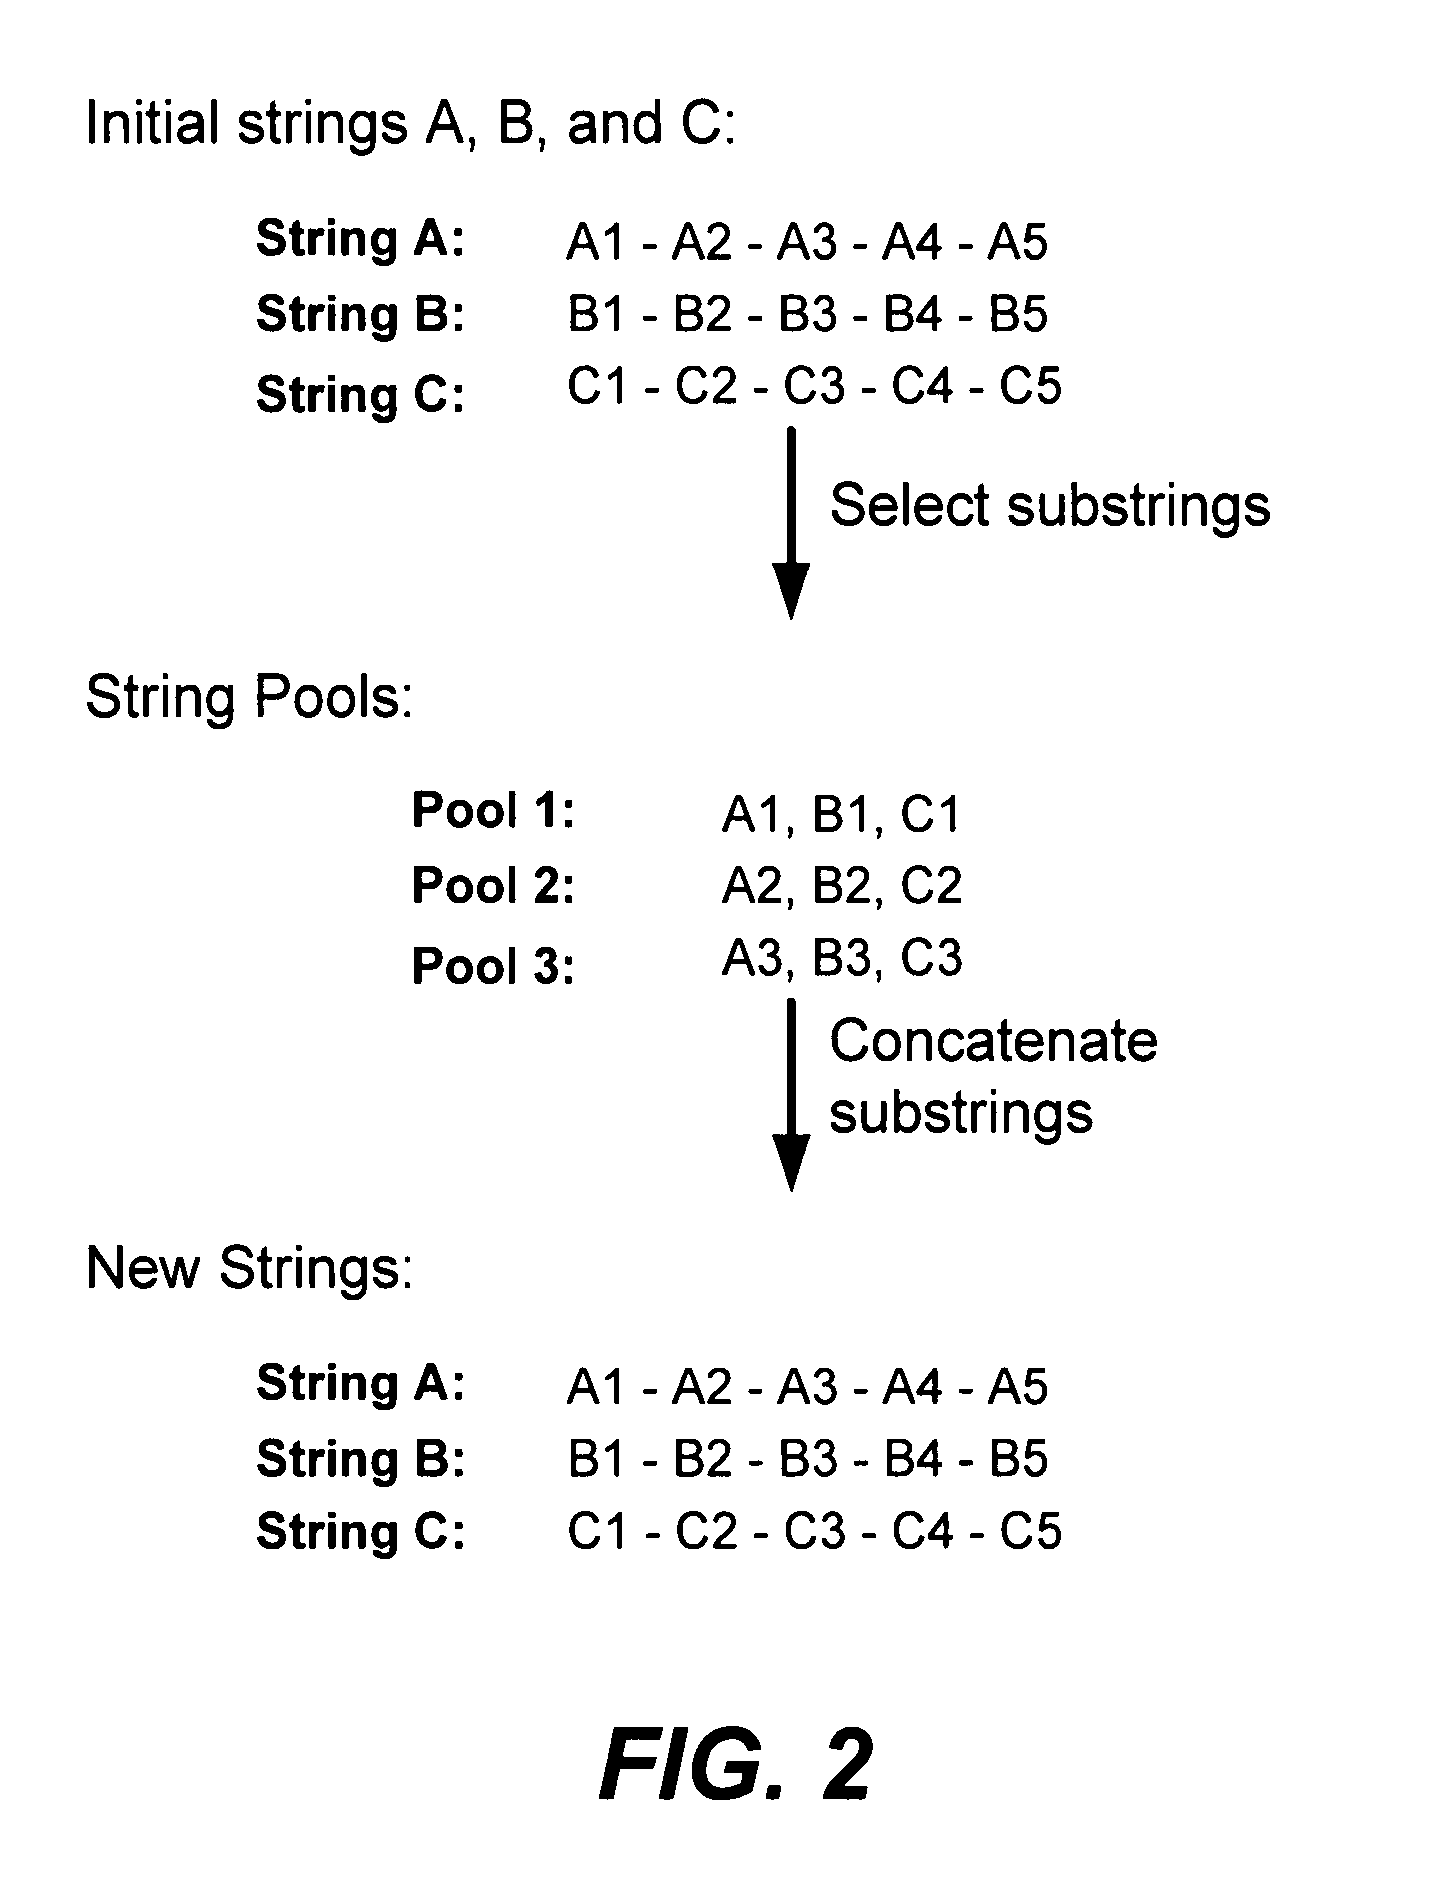 Methods of populating data structures for use in evolutionary simulations